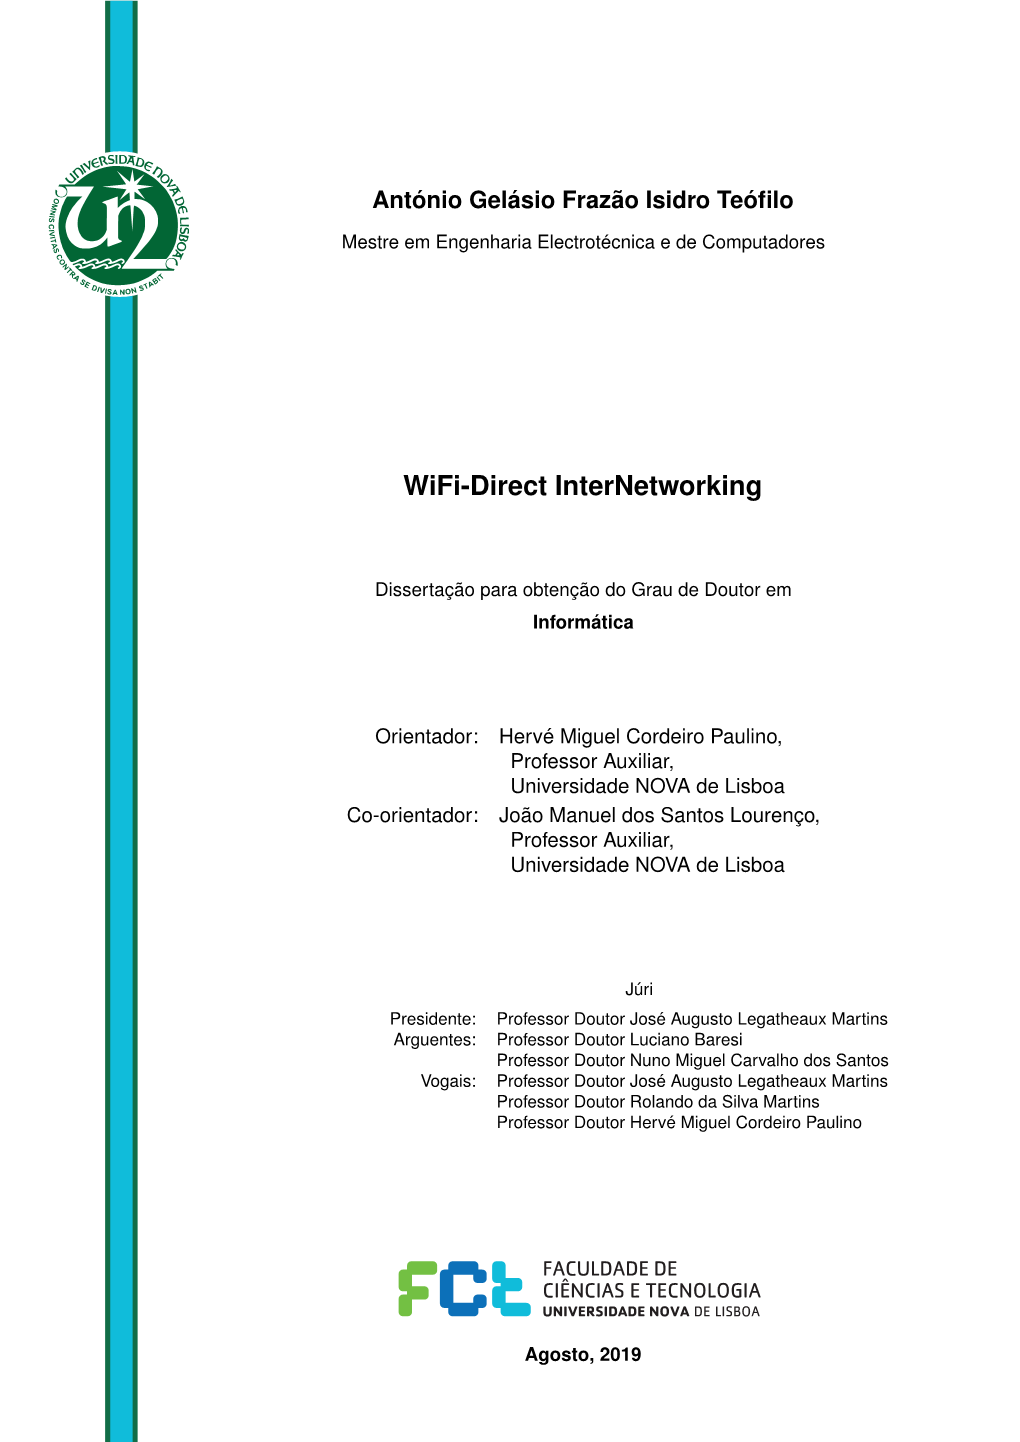 Wifi-Direct Internetworking